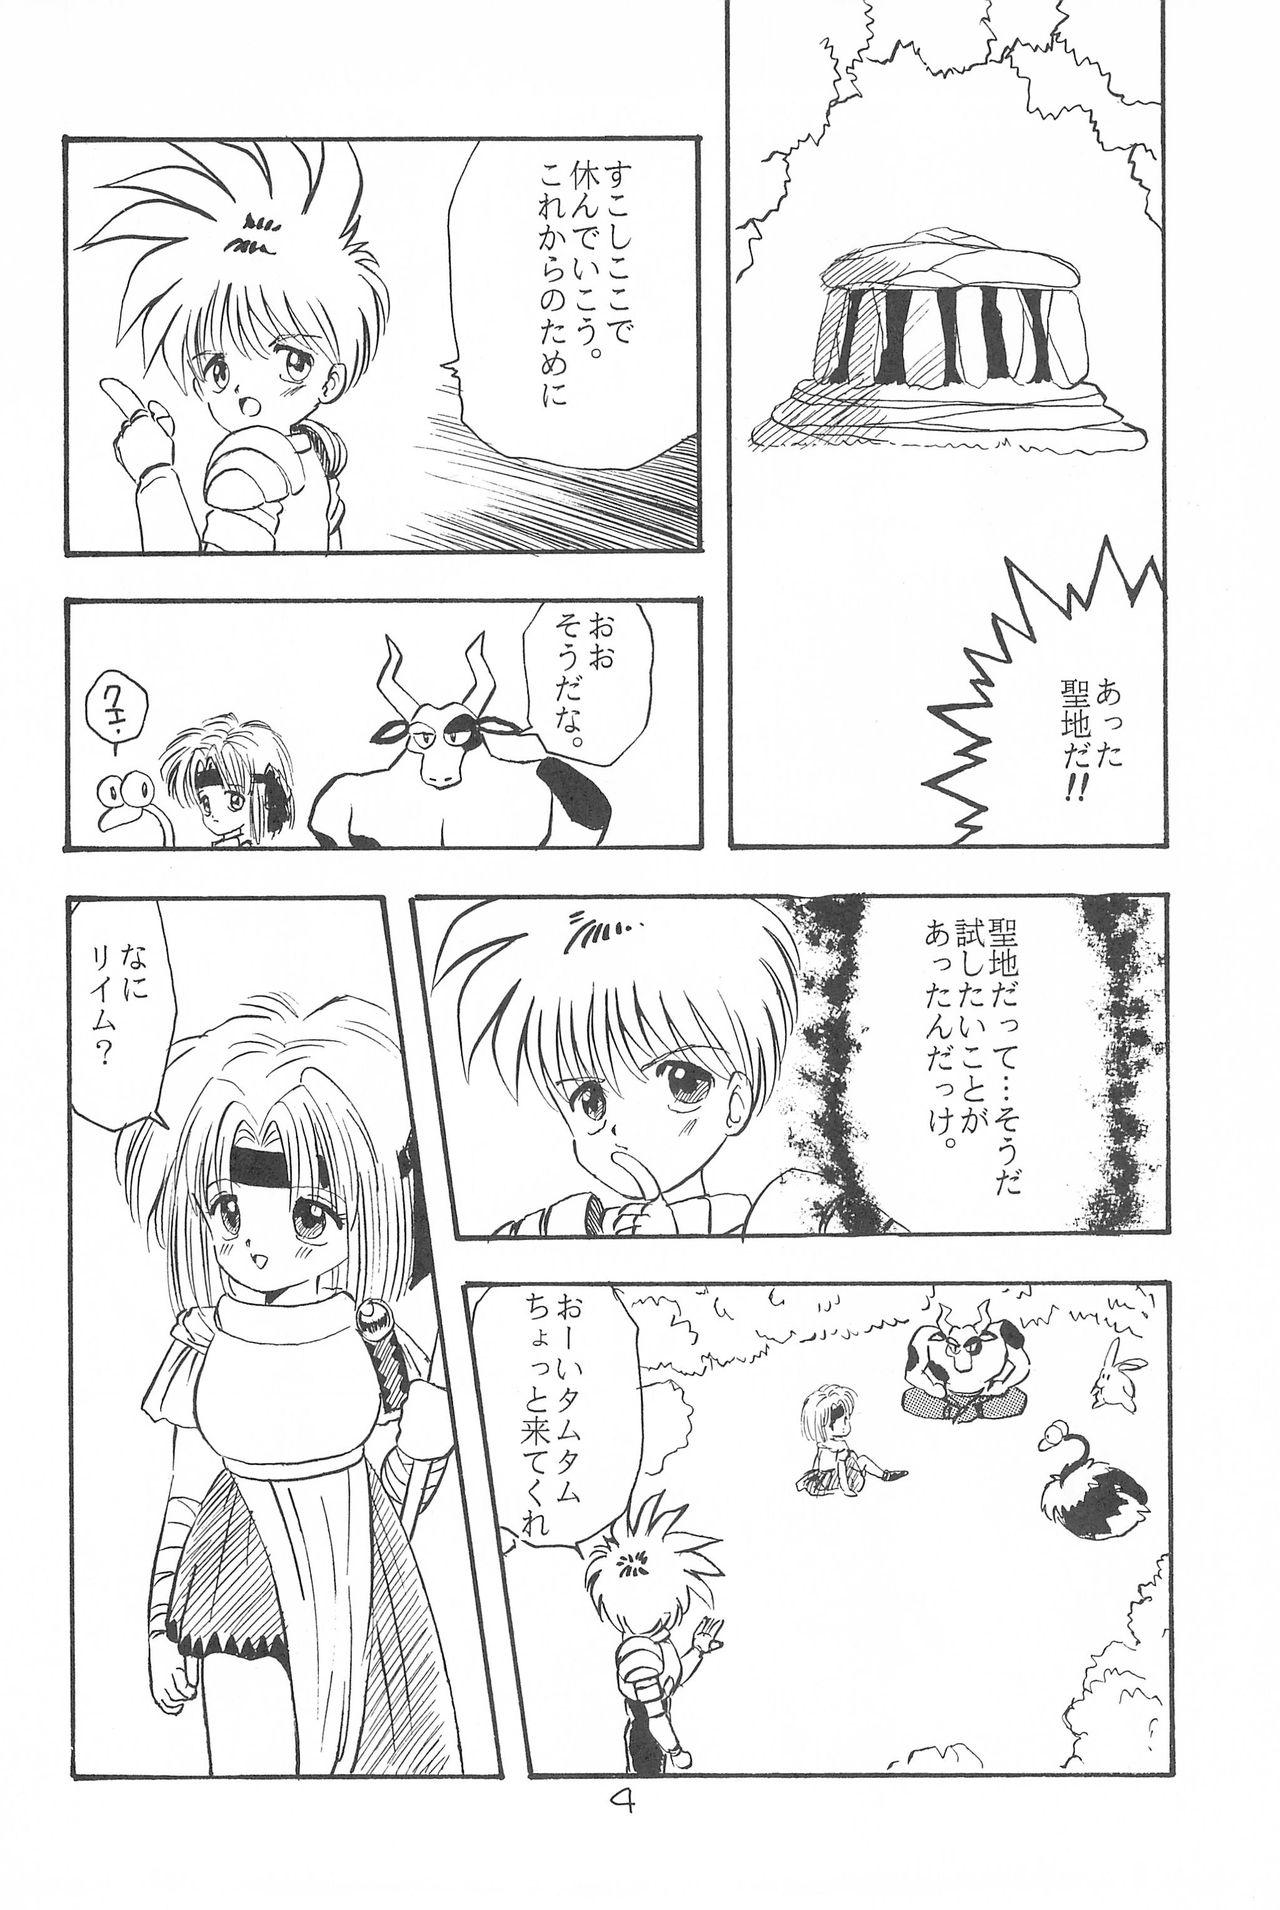 POV LITTLE GIRLS OF THE GAME CHARACTER SELECT-2 - Twinbee Chacal - Page 6